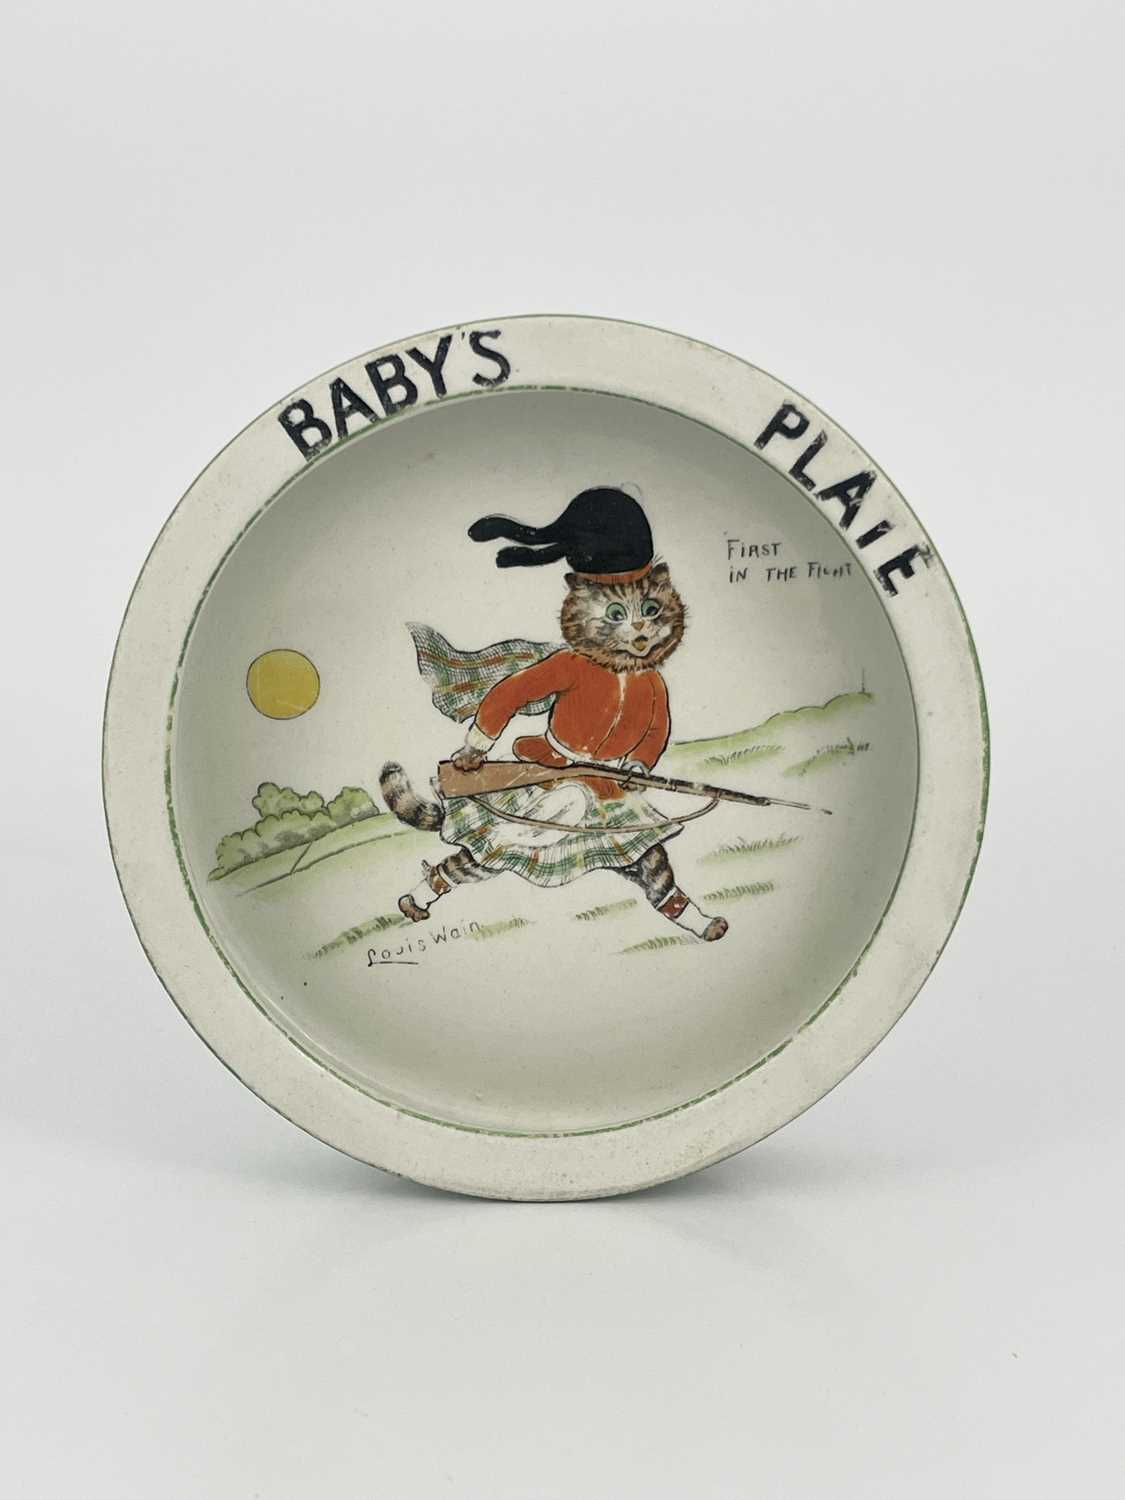 Louis Wain for Paragon, a circular baby's plate, 'First in the Fight', 17.,5cm diameter, black - Image 2 of 4